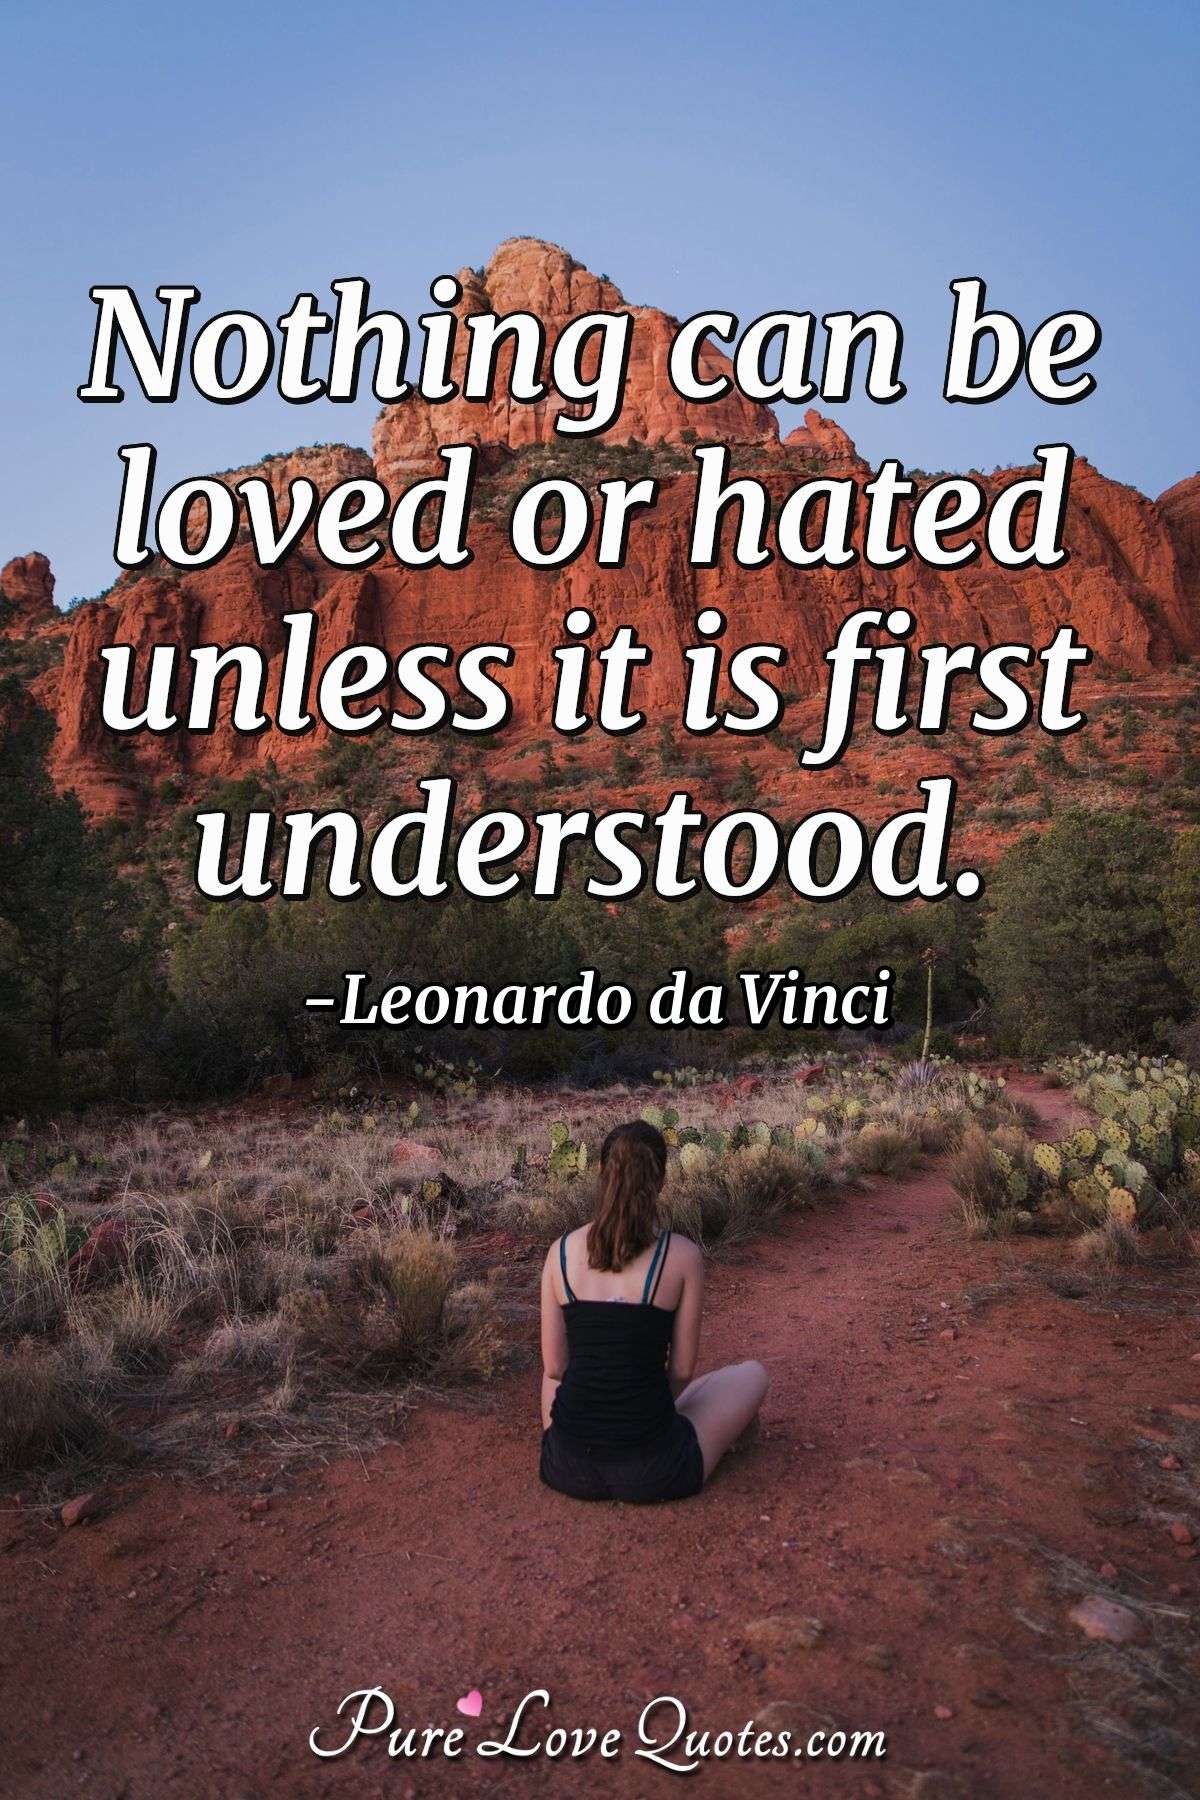 Nothing can be loved or hated unless it is first understood. - Leonardo da Vinci